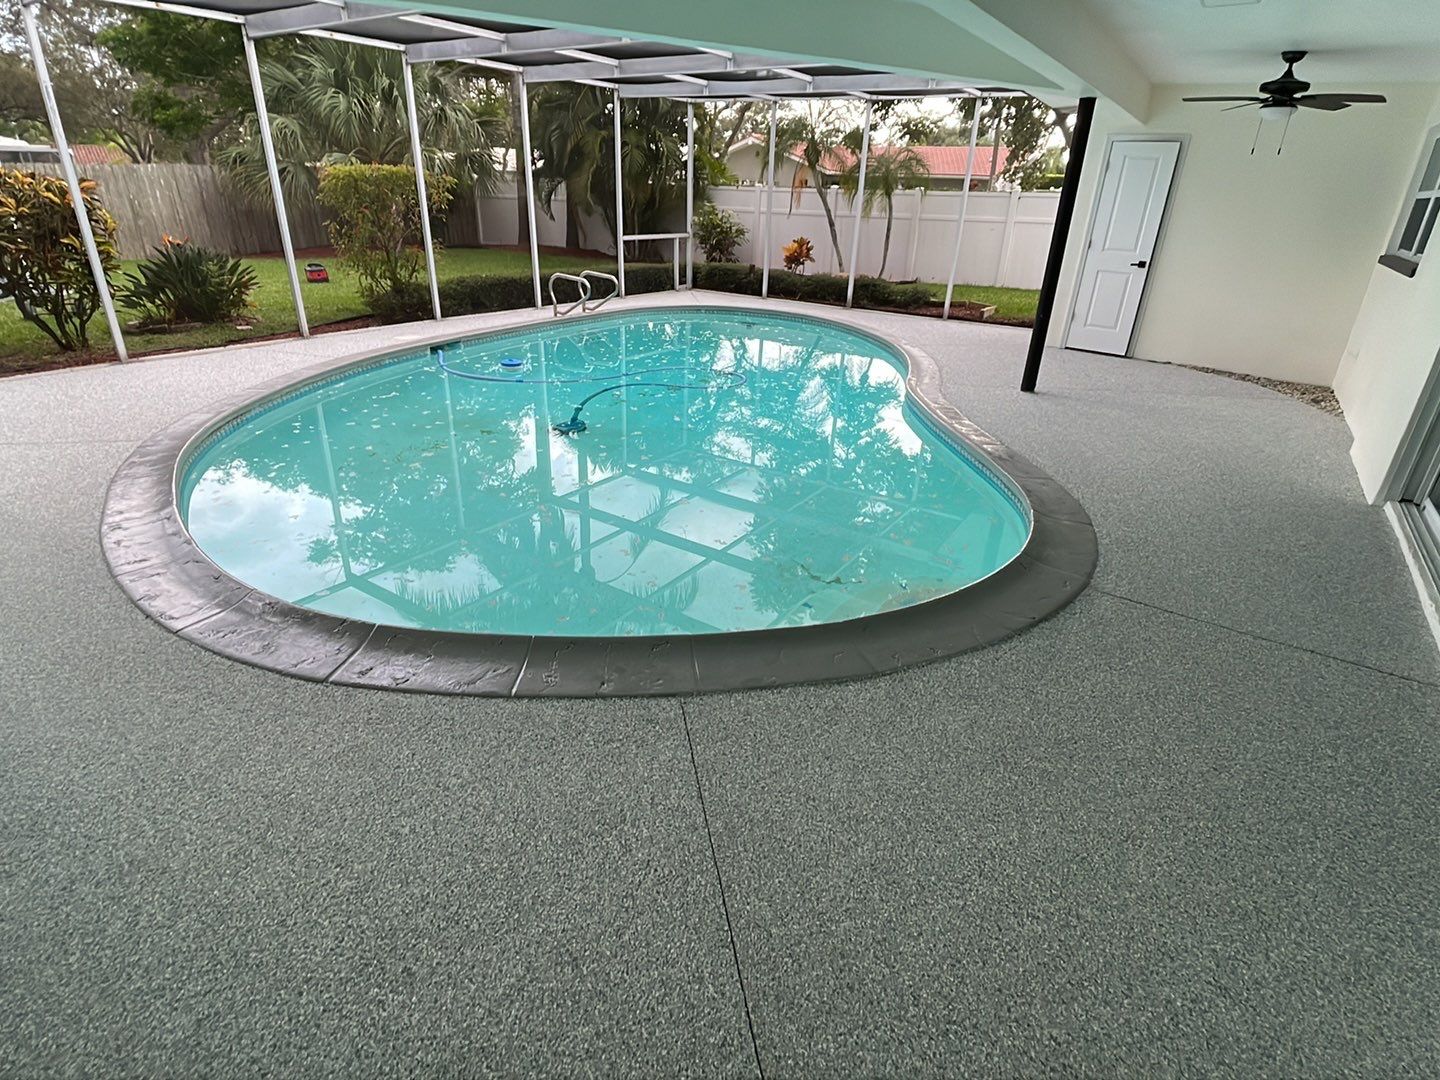 Concrete pool deck after pitting has been filled and new concrete coating applied